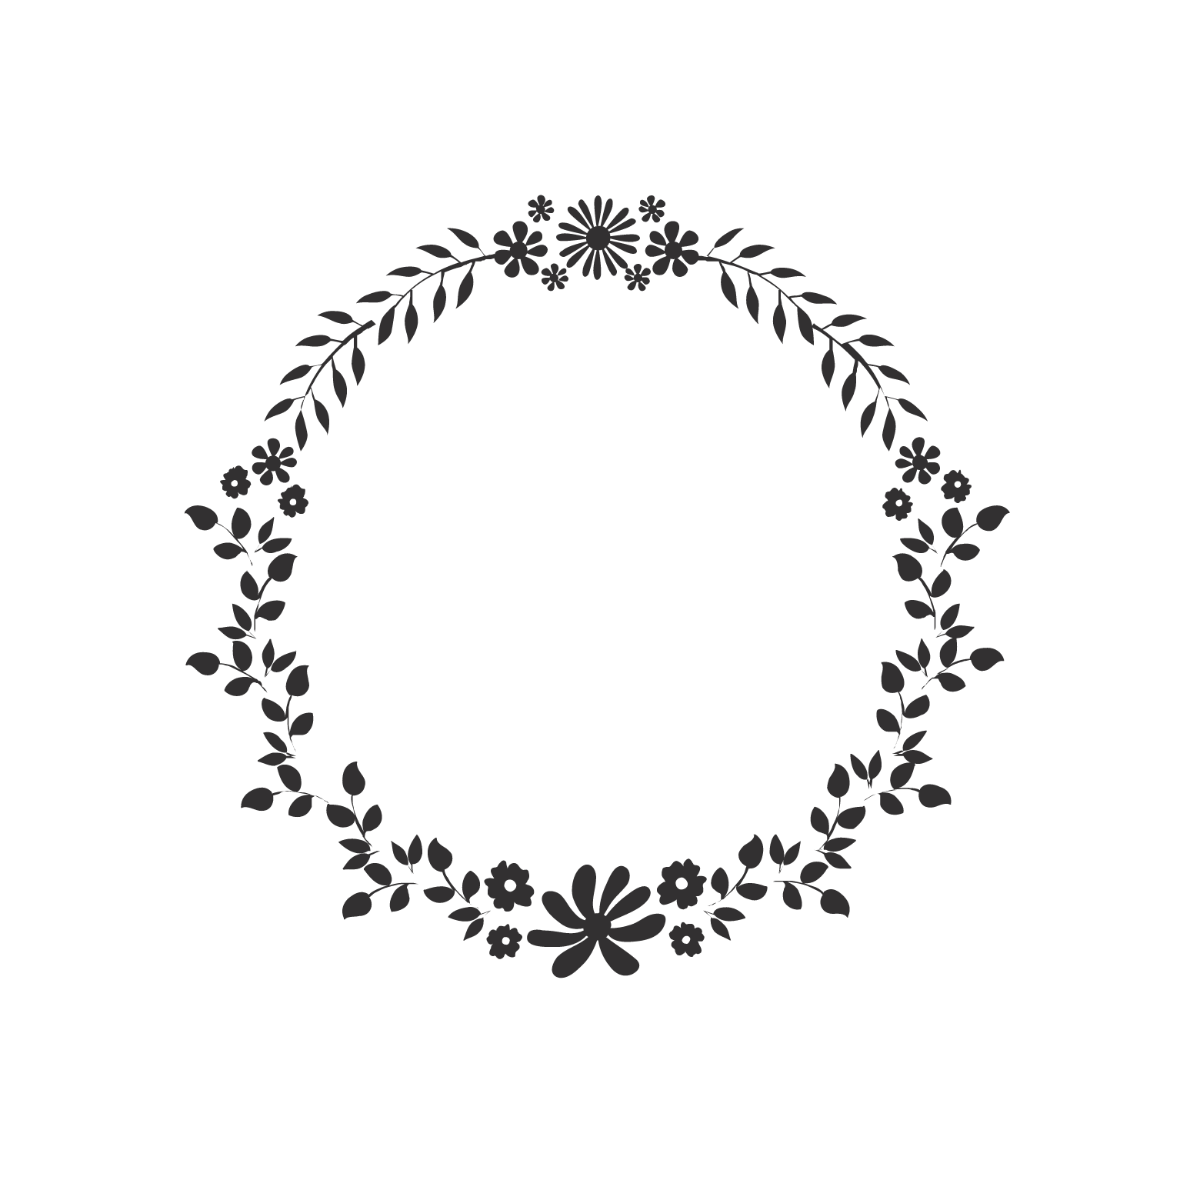 Free Black Floral Wreath Vector Template